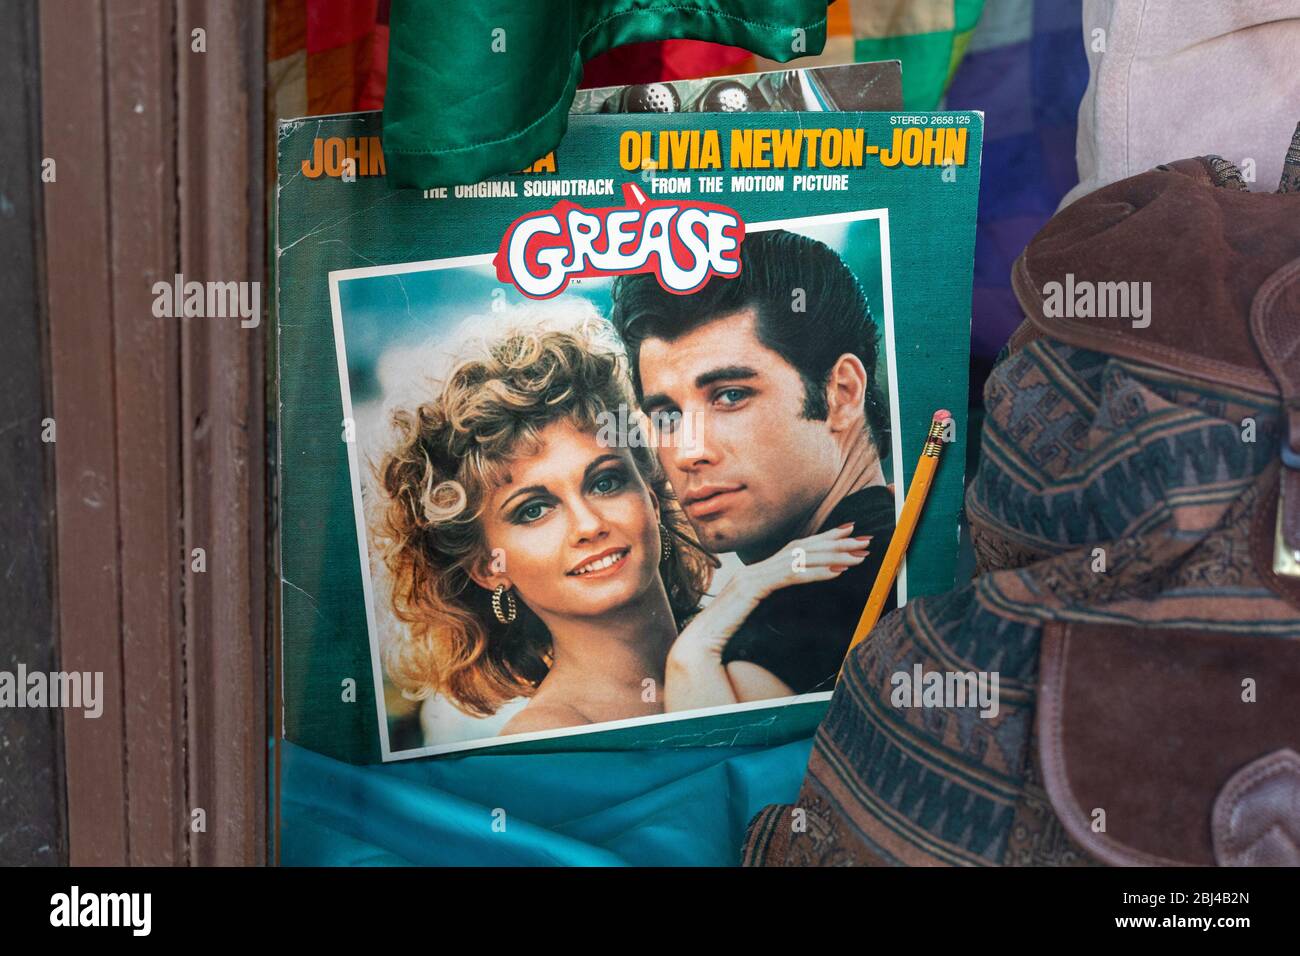 Used Grease movie soundtrack vinyl LP at vintage and secondhand store display window Stock Photo